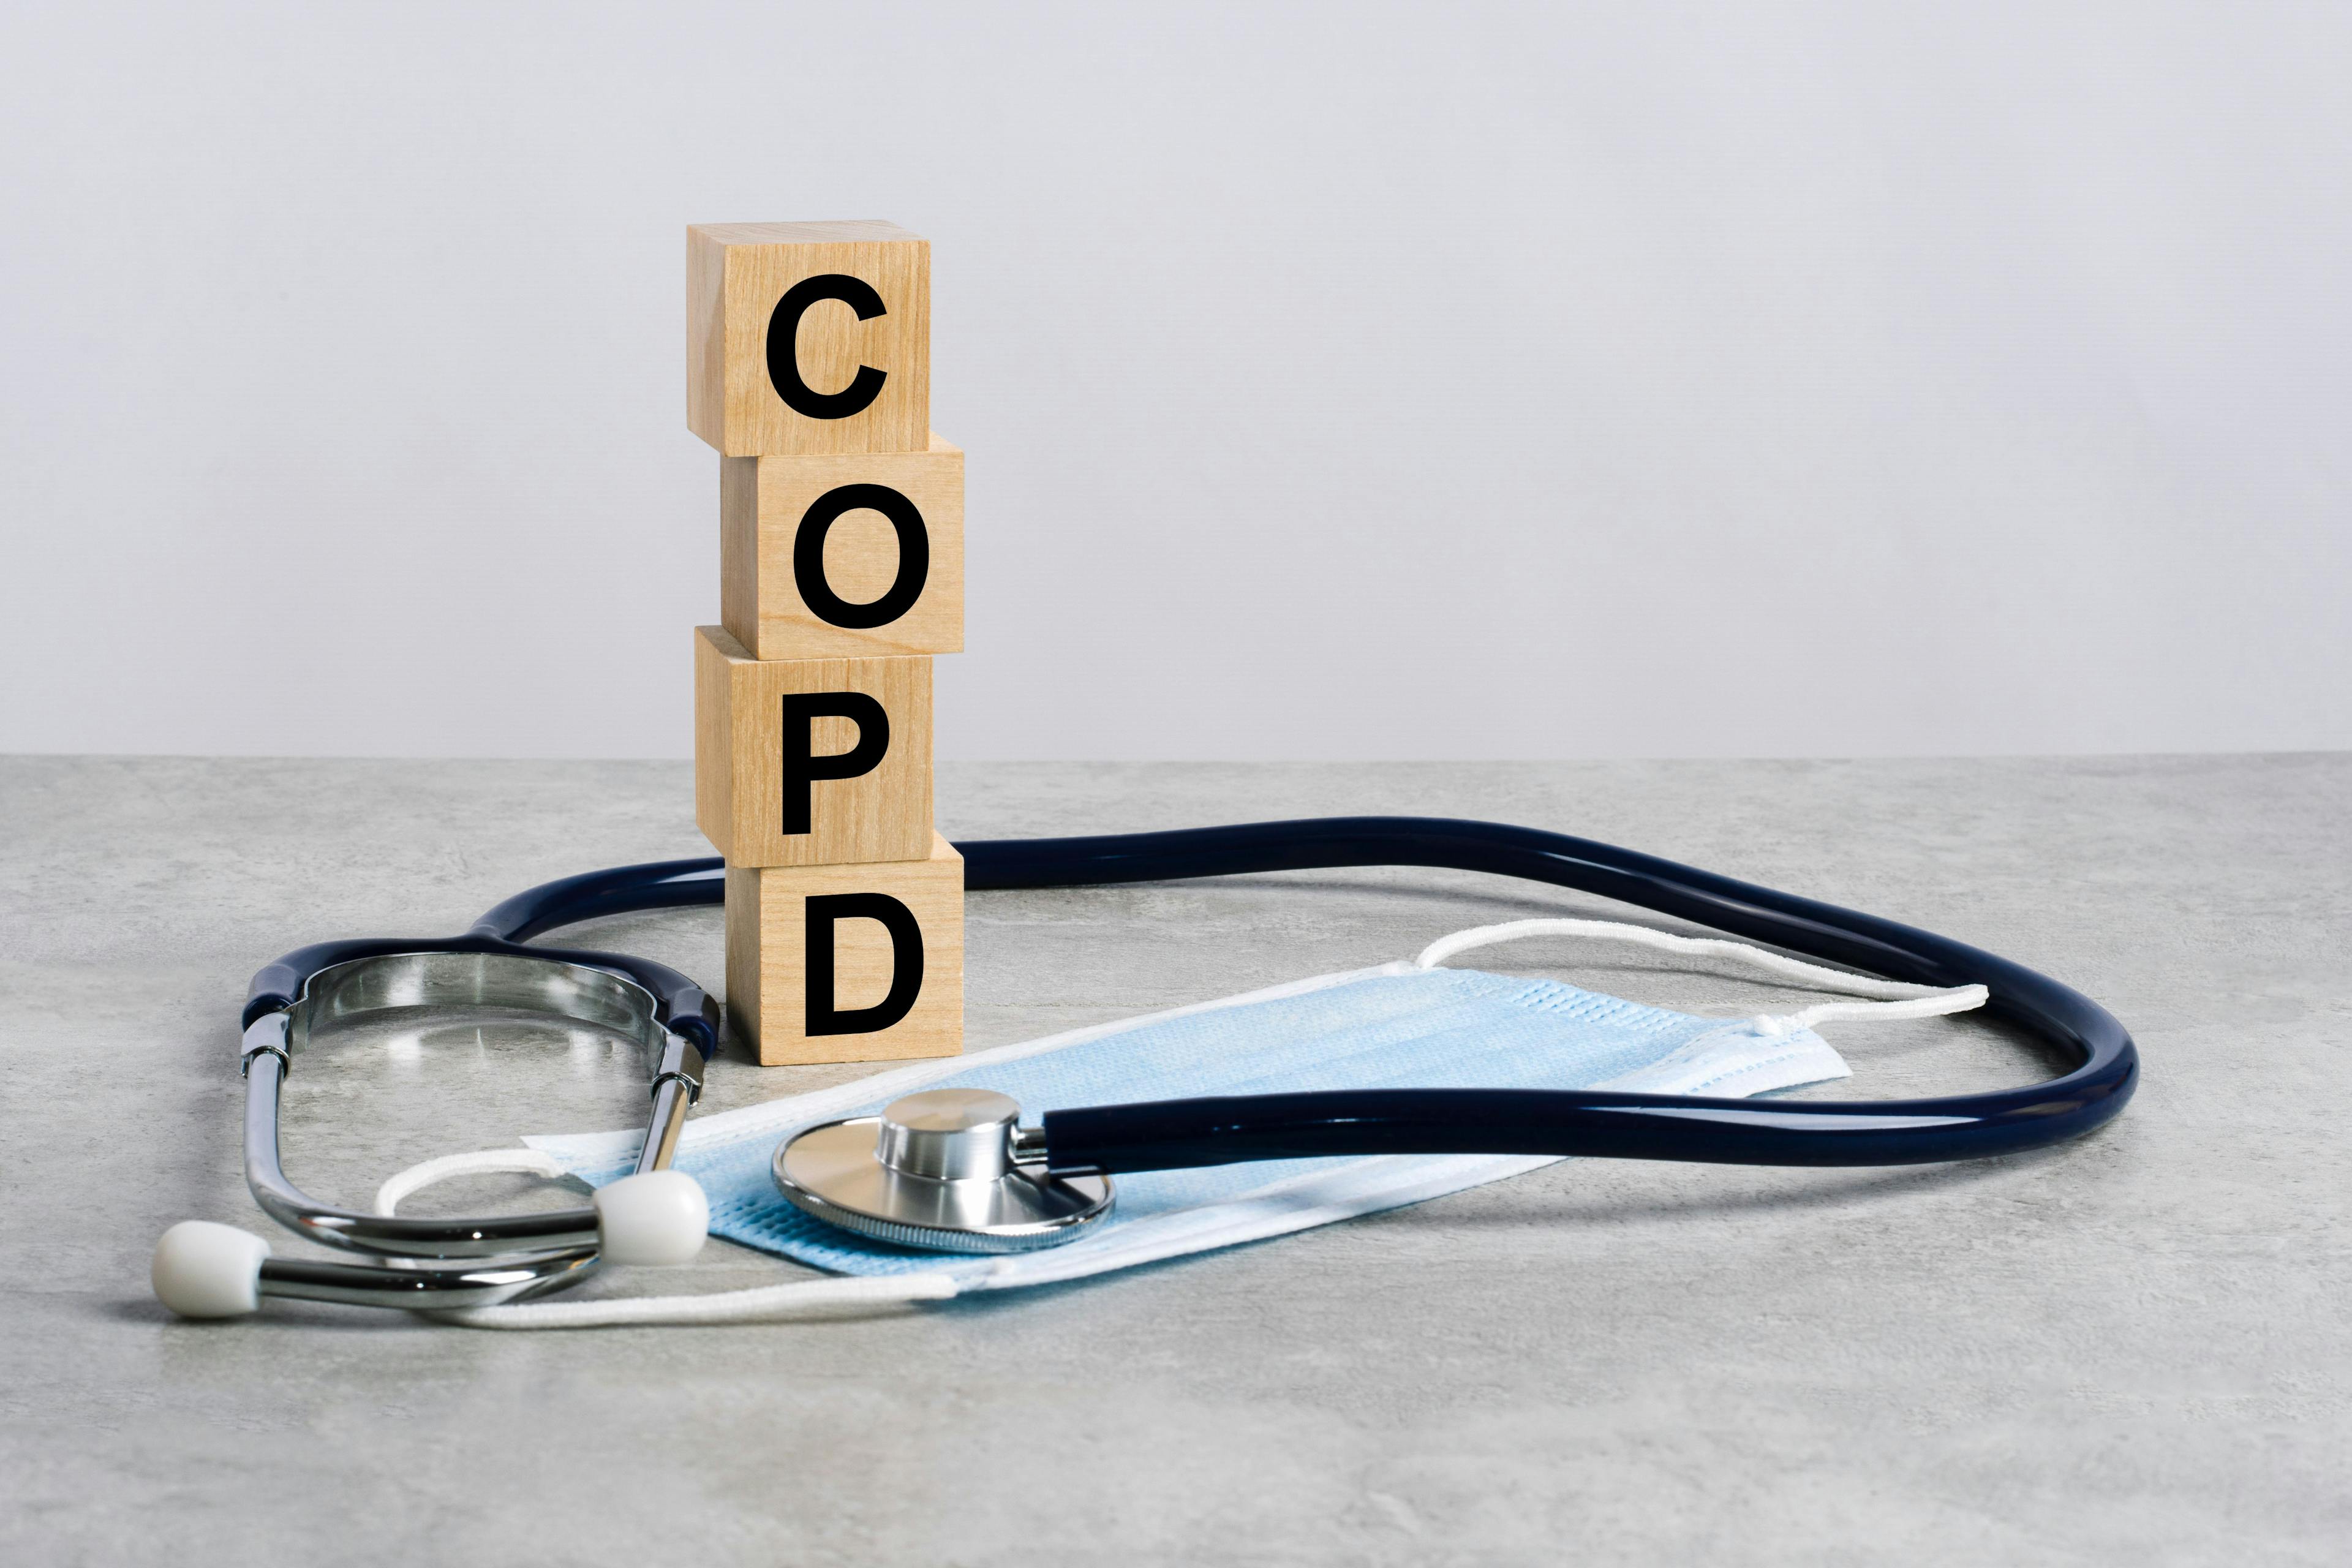 COPD with stethoscope and mask / Maks_Lab - stock.adobe.com